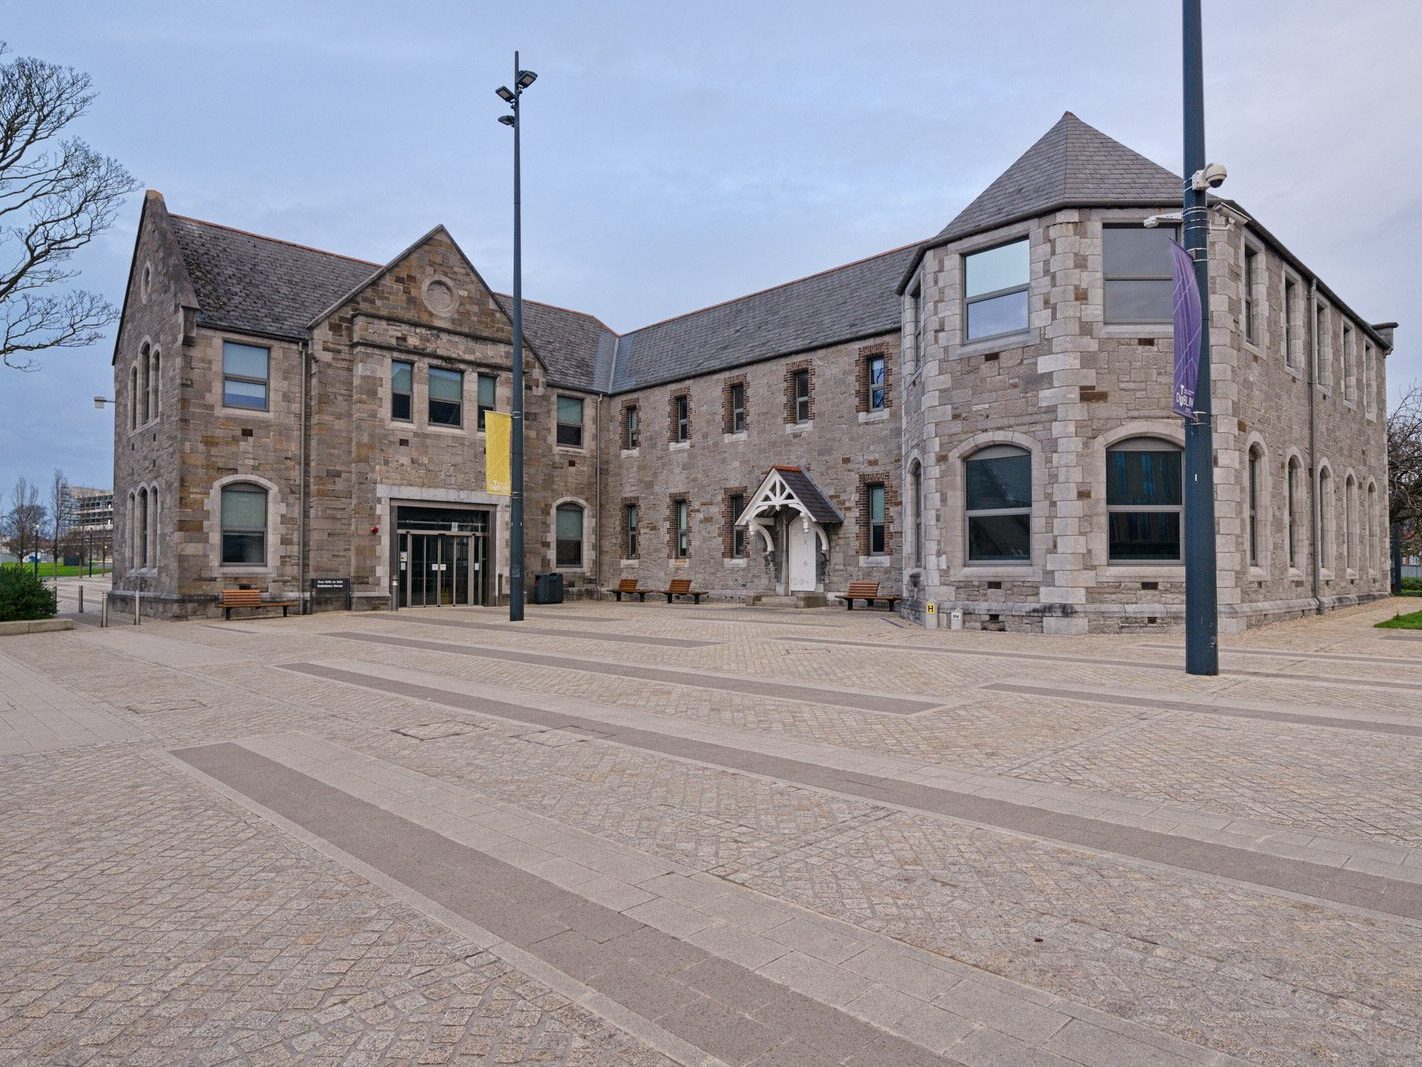 I VISITED THE GRANGEGORMAN UNIVERSITY CAMPUS [THERE WAS NO SIGN OF CHRISTMAS CELEBRATIONS THERE]-226044-1